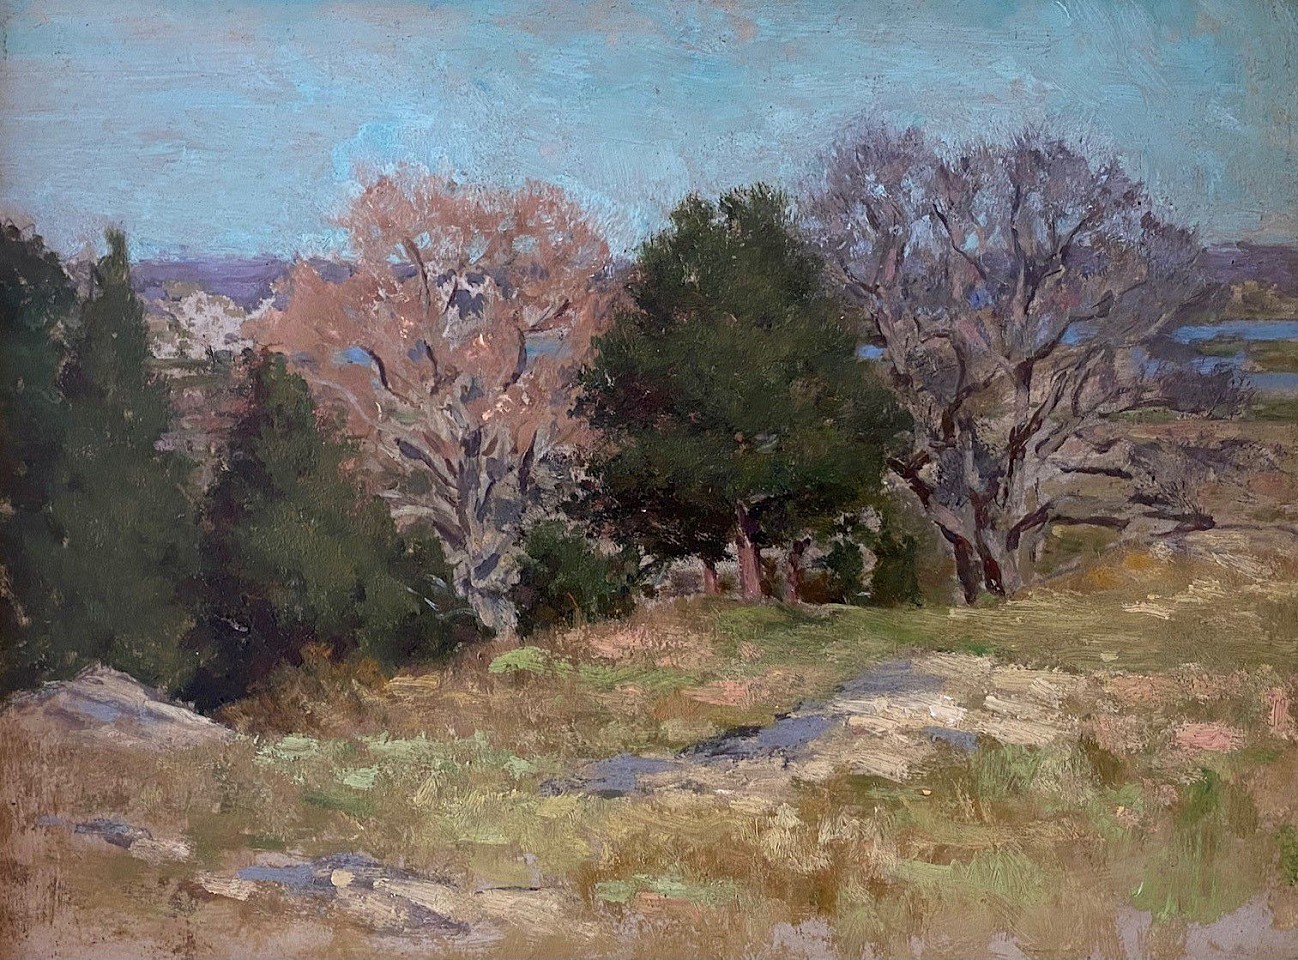 Jules Turcas, The Old Lyme Hills
oil on board, 12"" x 16""
EWP322.11
$2,250